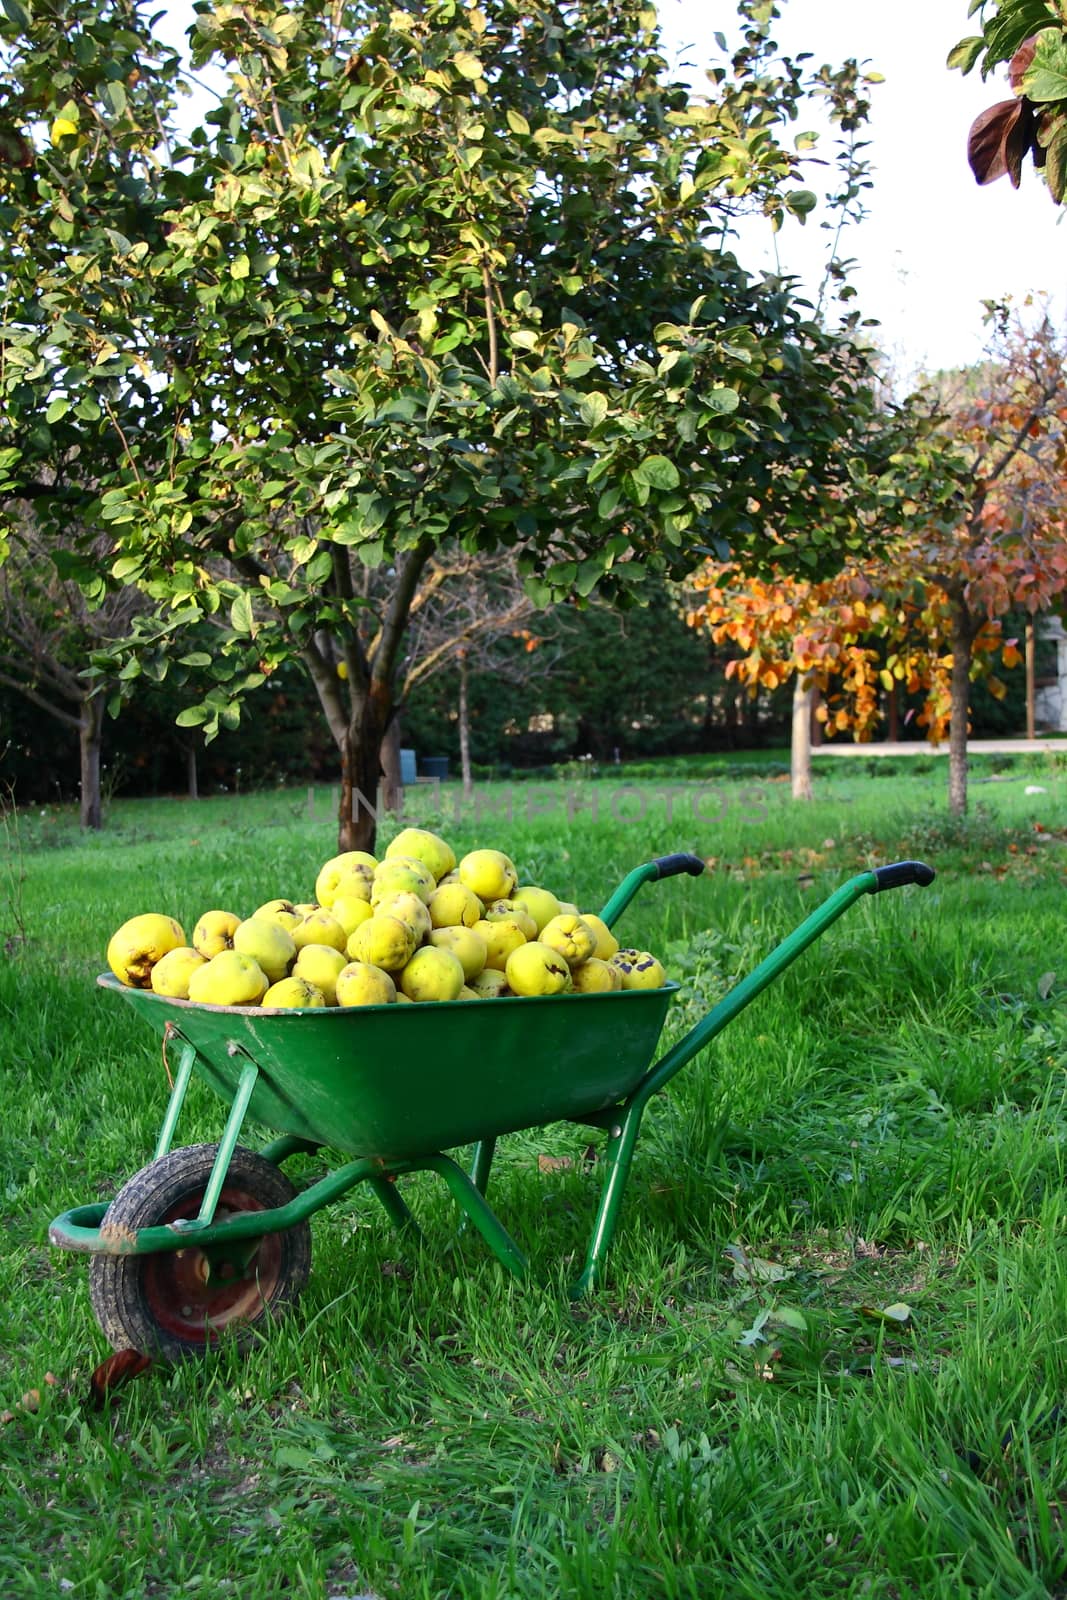 collected fresh persimmon and quince on wheelbarrow